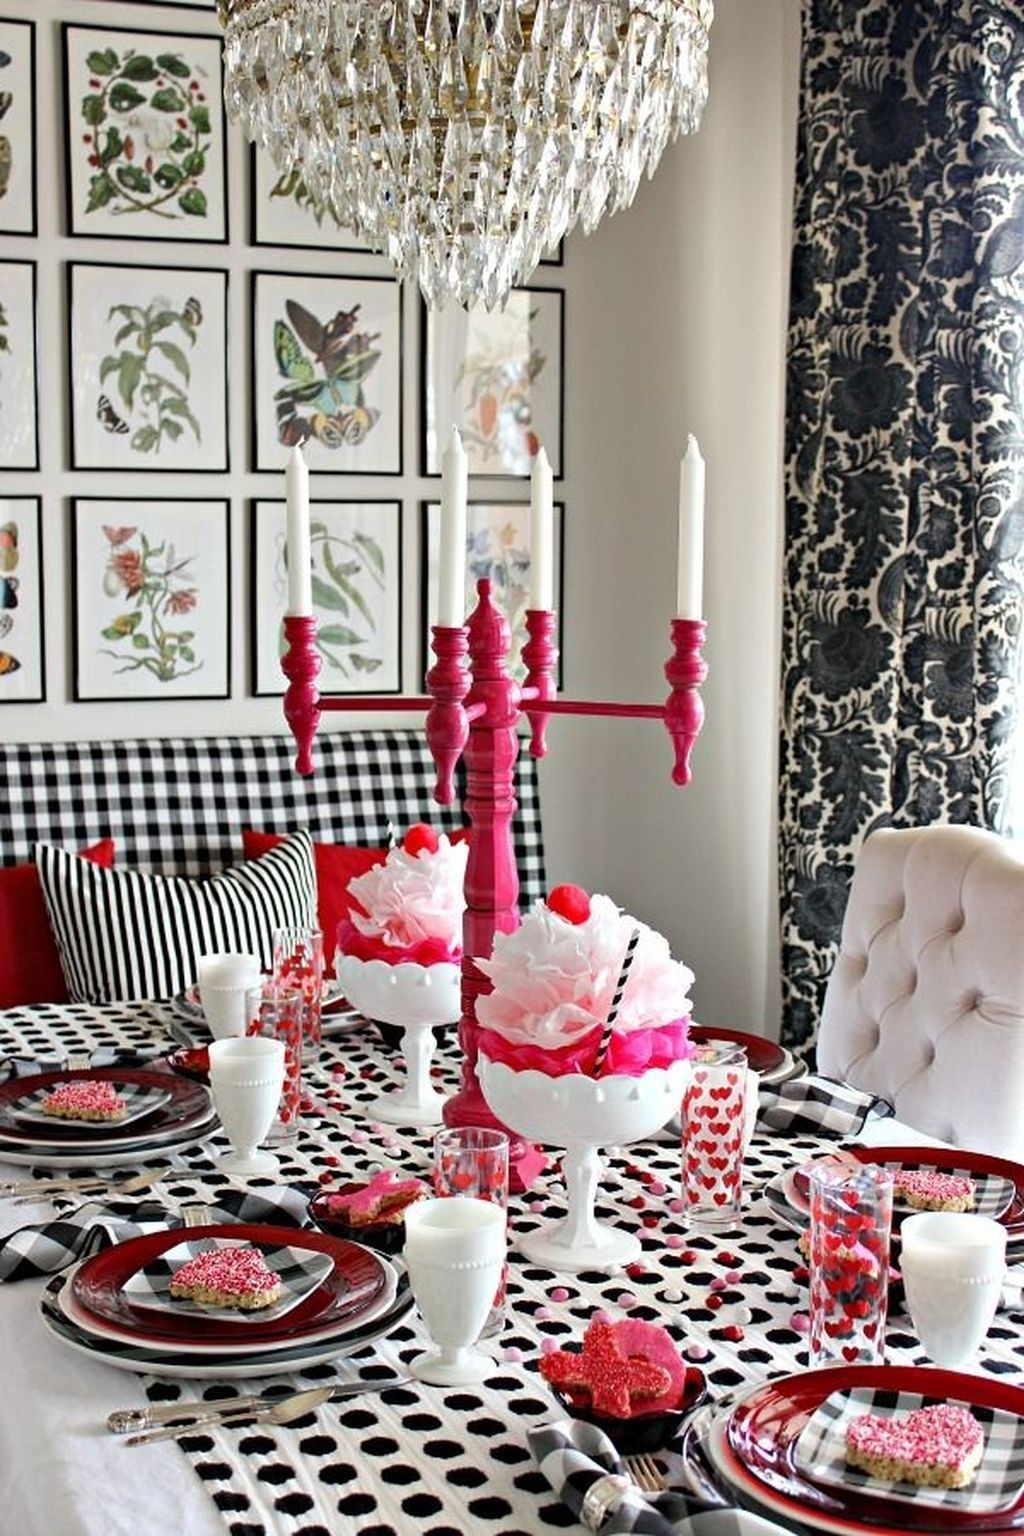 Most Inspiring Valentine’s Day Simple Table Decoration Ideas 19